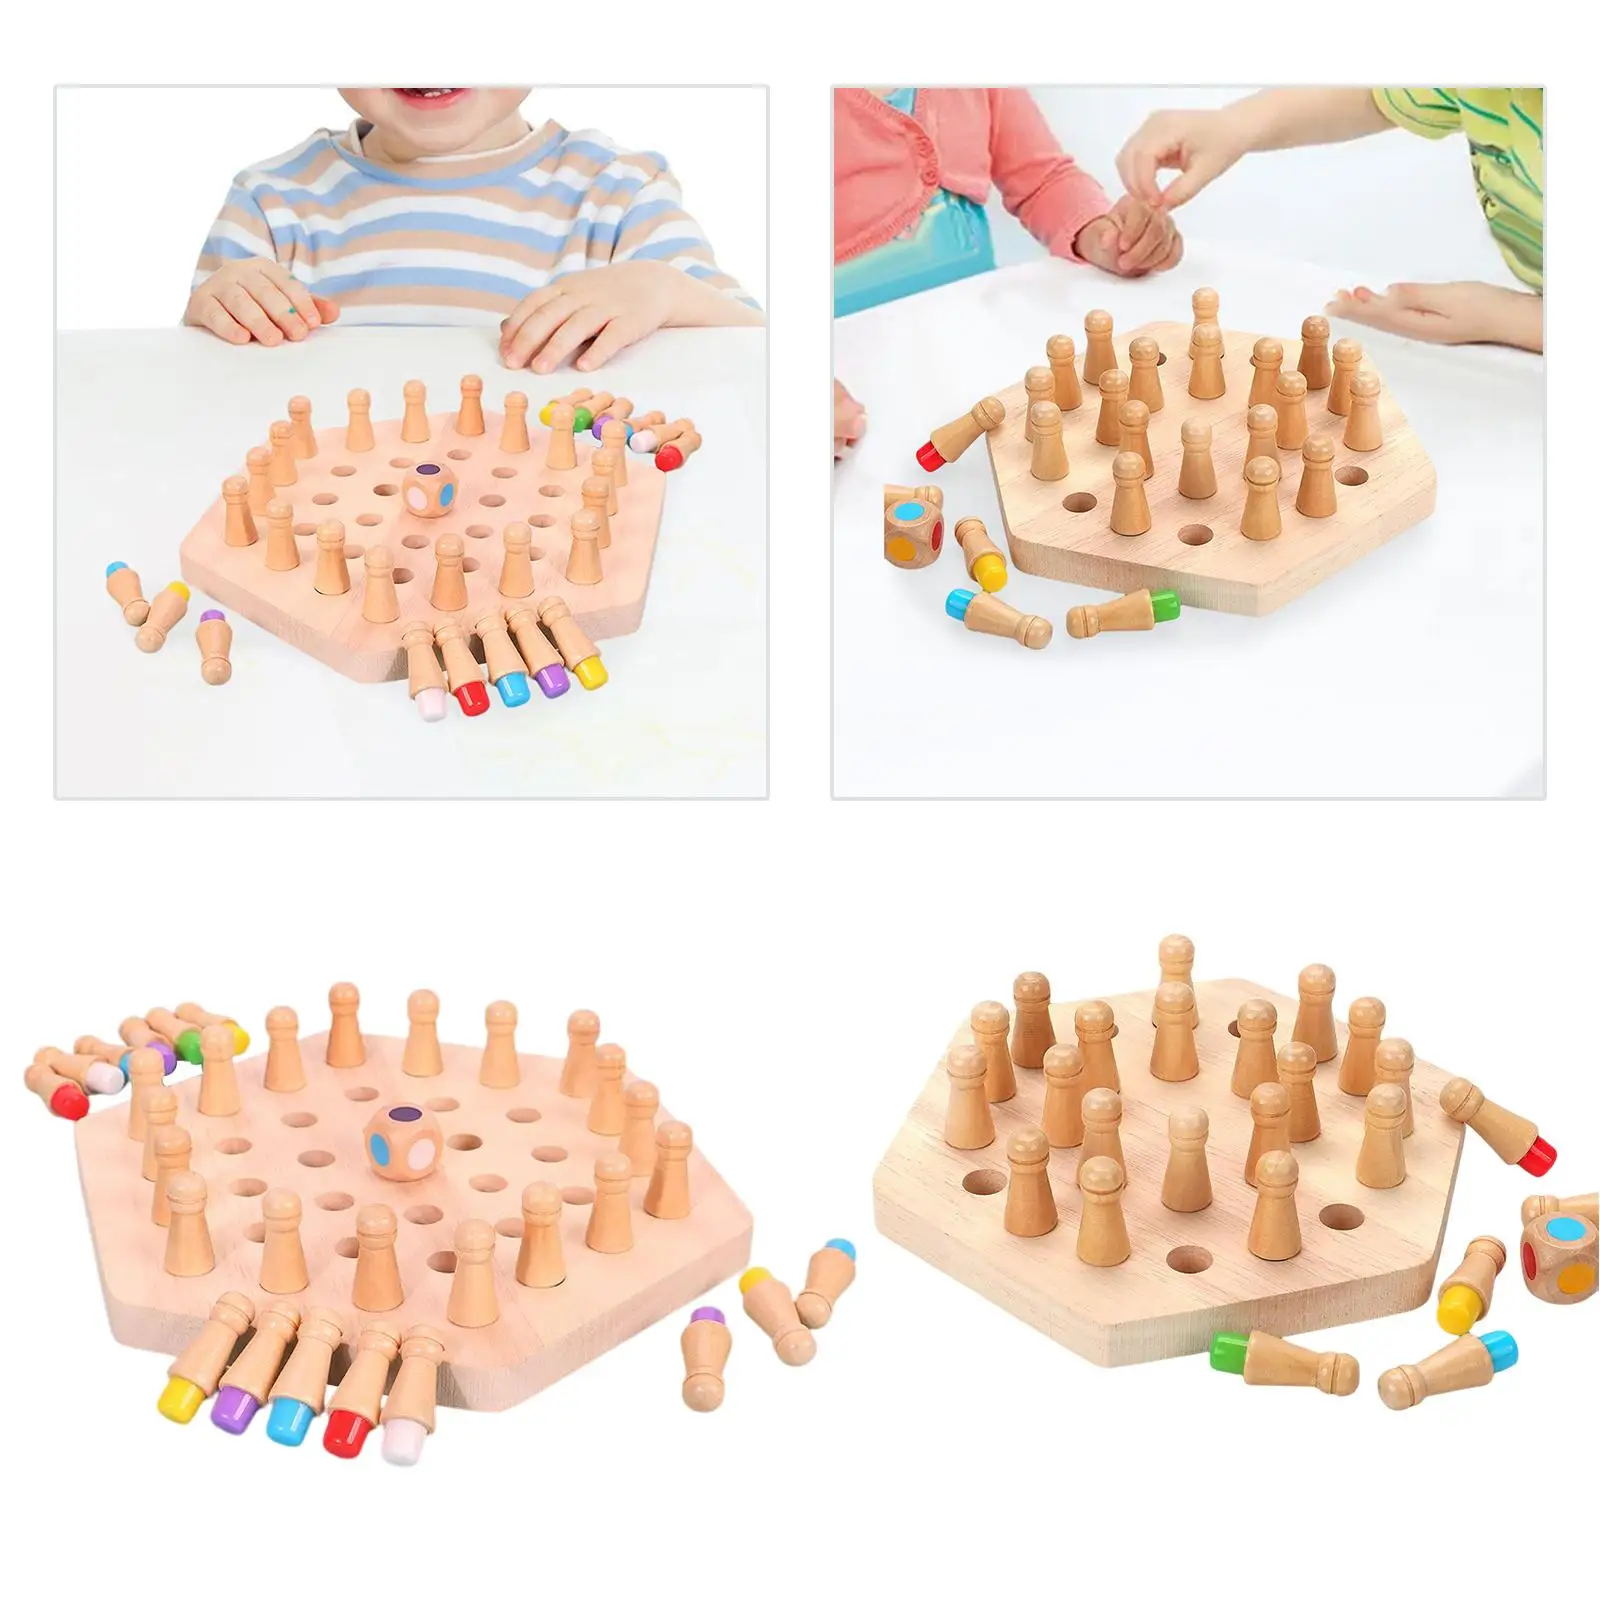 Wooden Memory Chess Games Block Puzzle Game for Boys and Girls Family Educational Toy Desktop Board Game Interactive Game